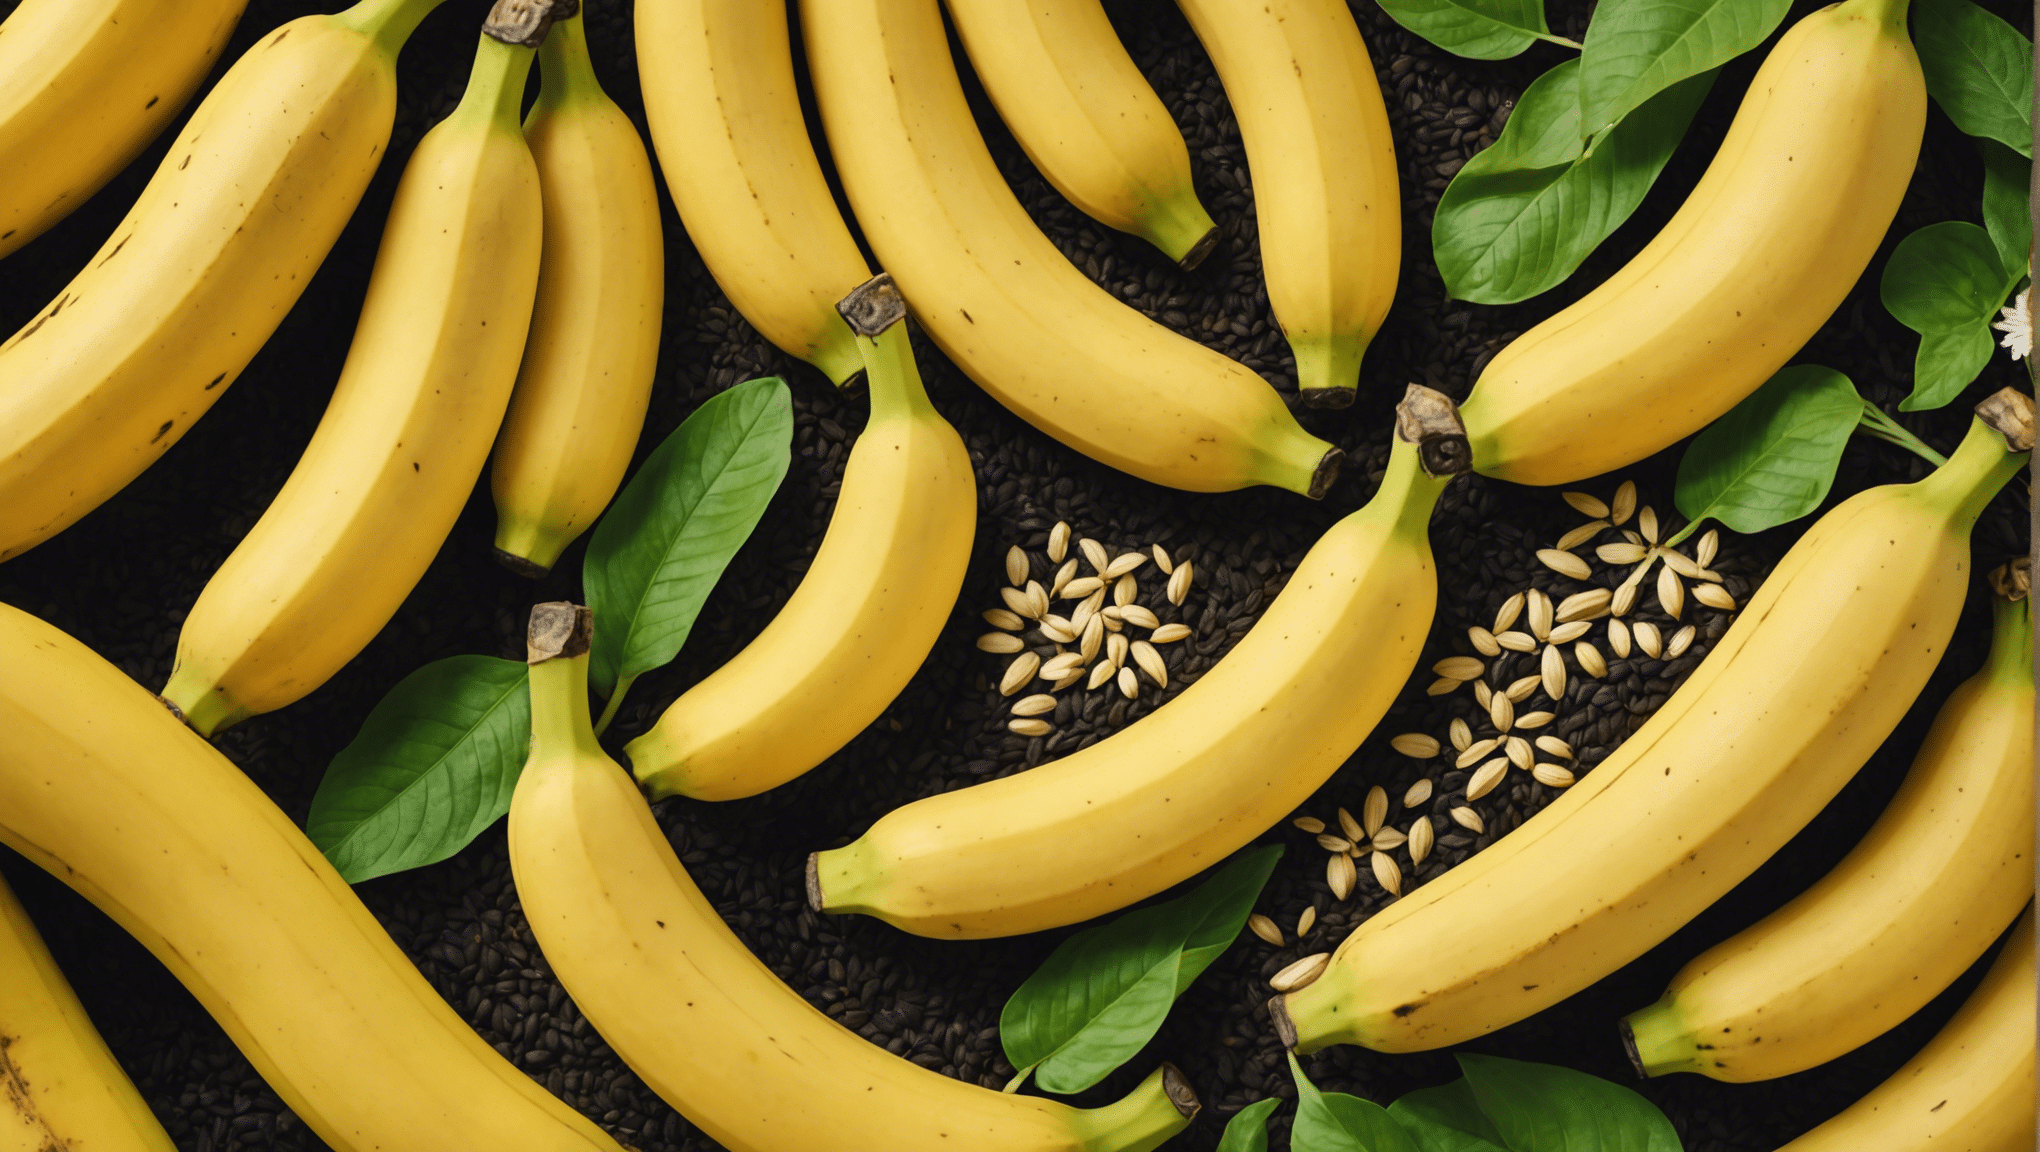 discover whether it's safe to eat bananas with seeds with our comprehensive guide. find out about the potential risks and benefits of consuming bananas with seeds.